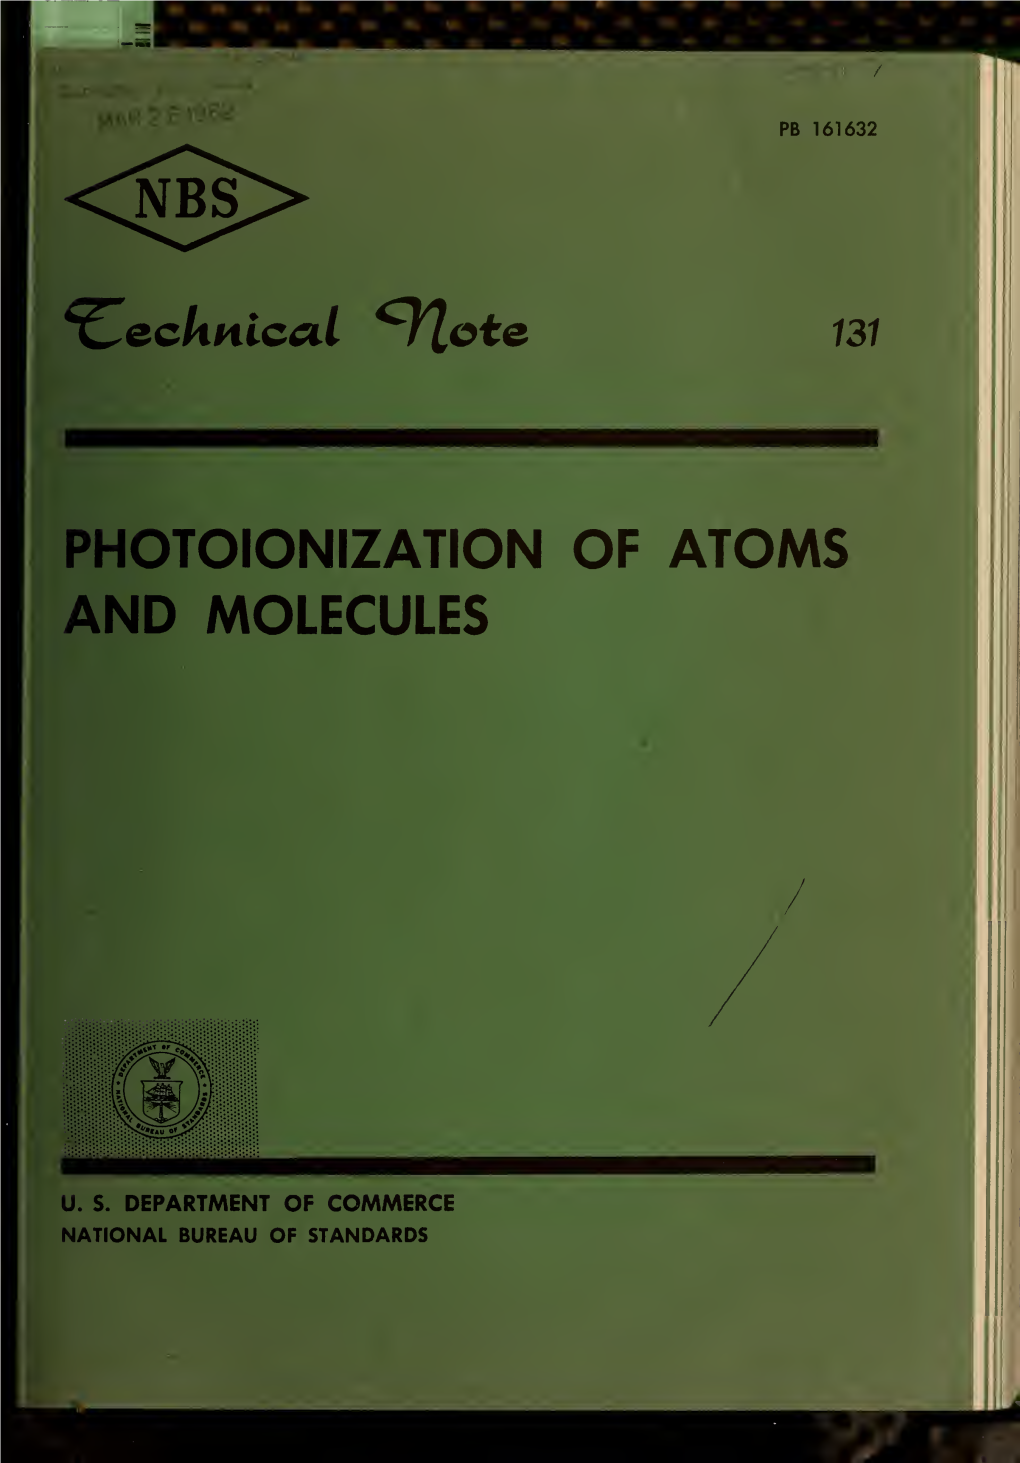 Photoionization of Atoms and Molecules